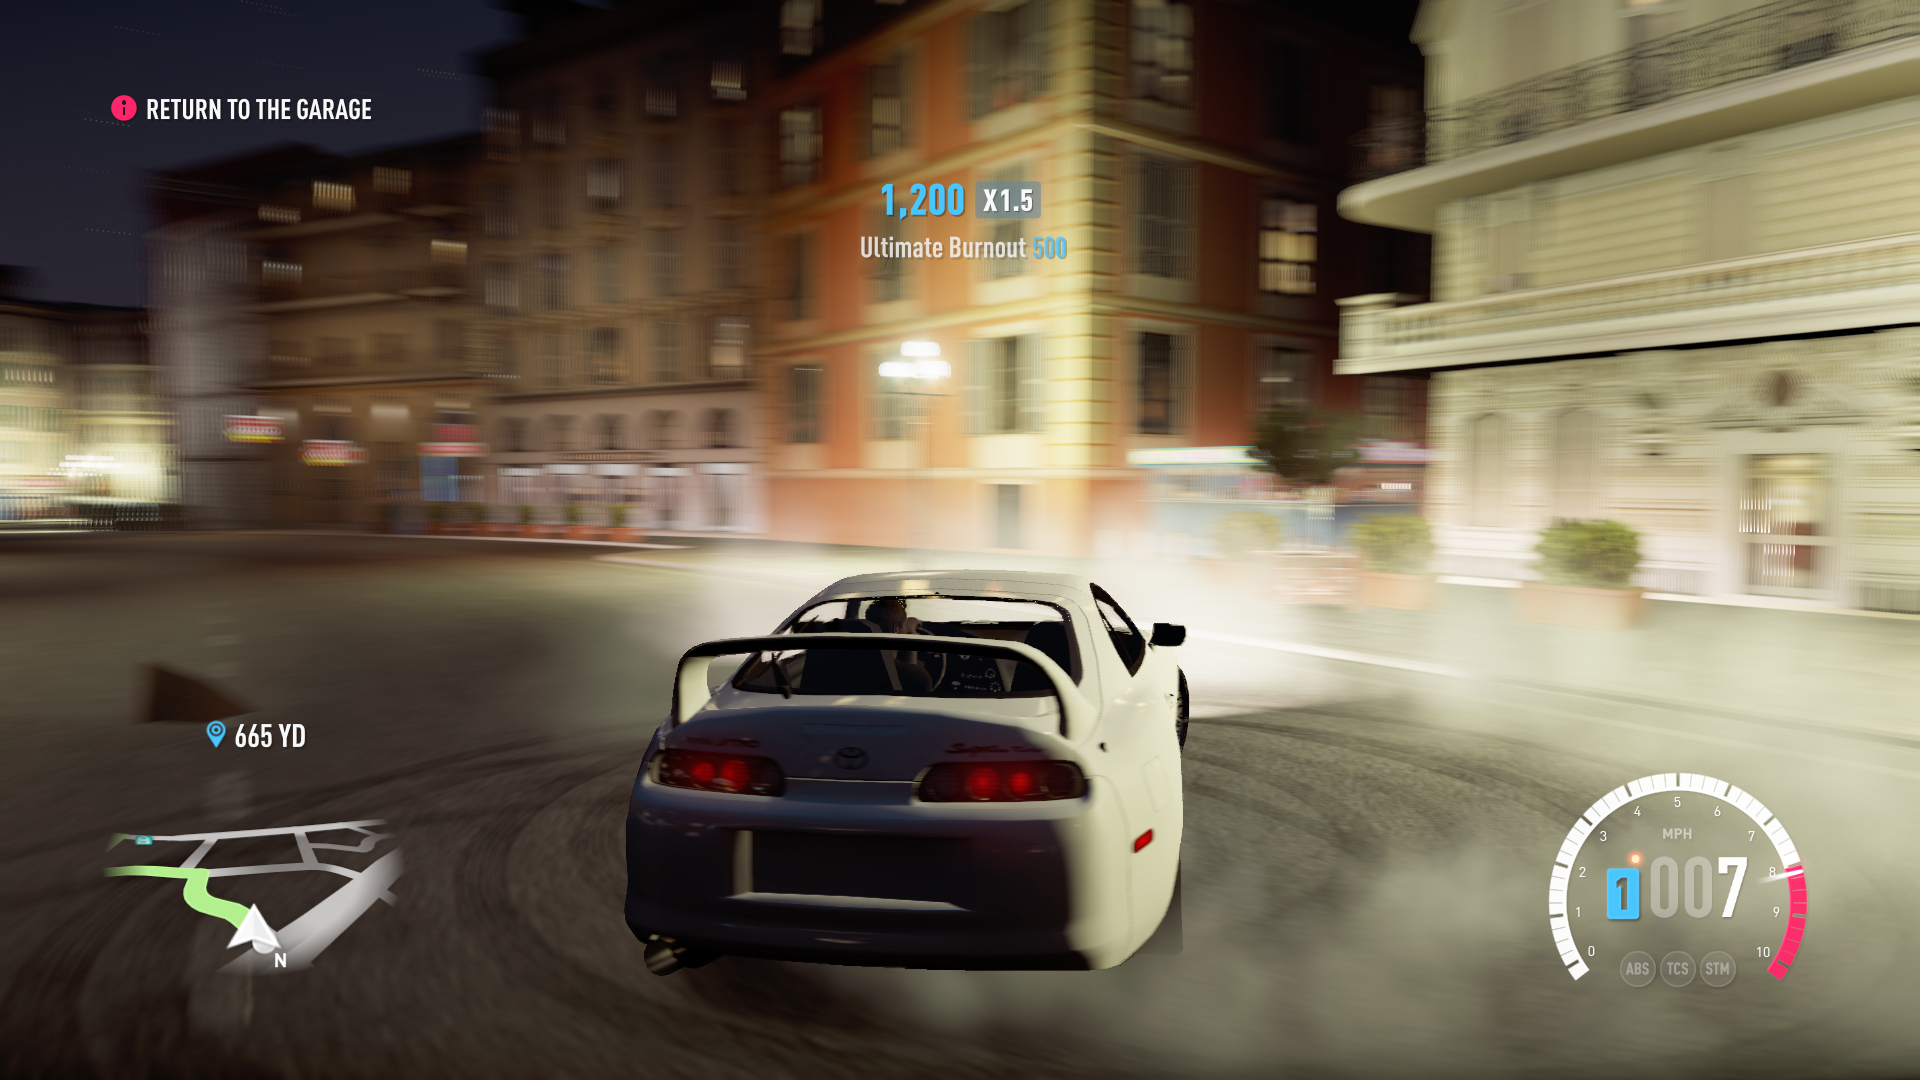 How long is Forza Horizon 2 Presents Fast & Furious?